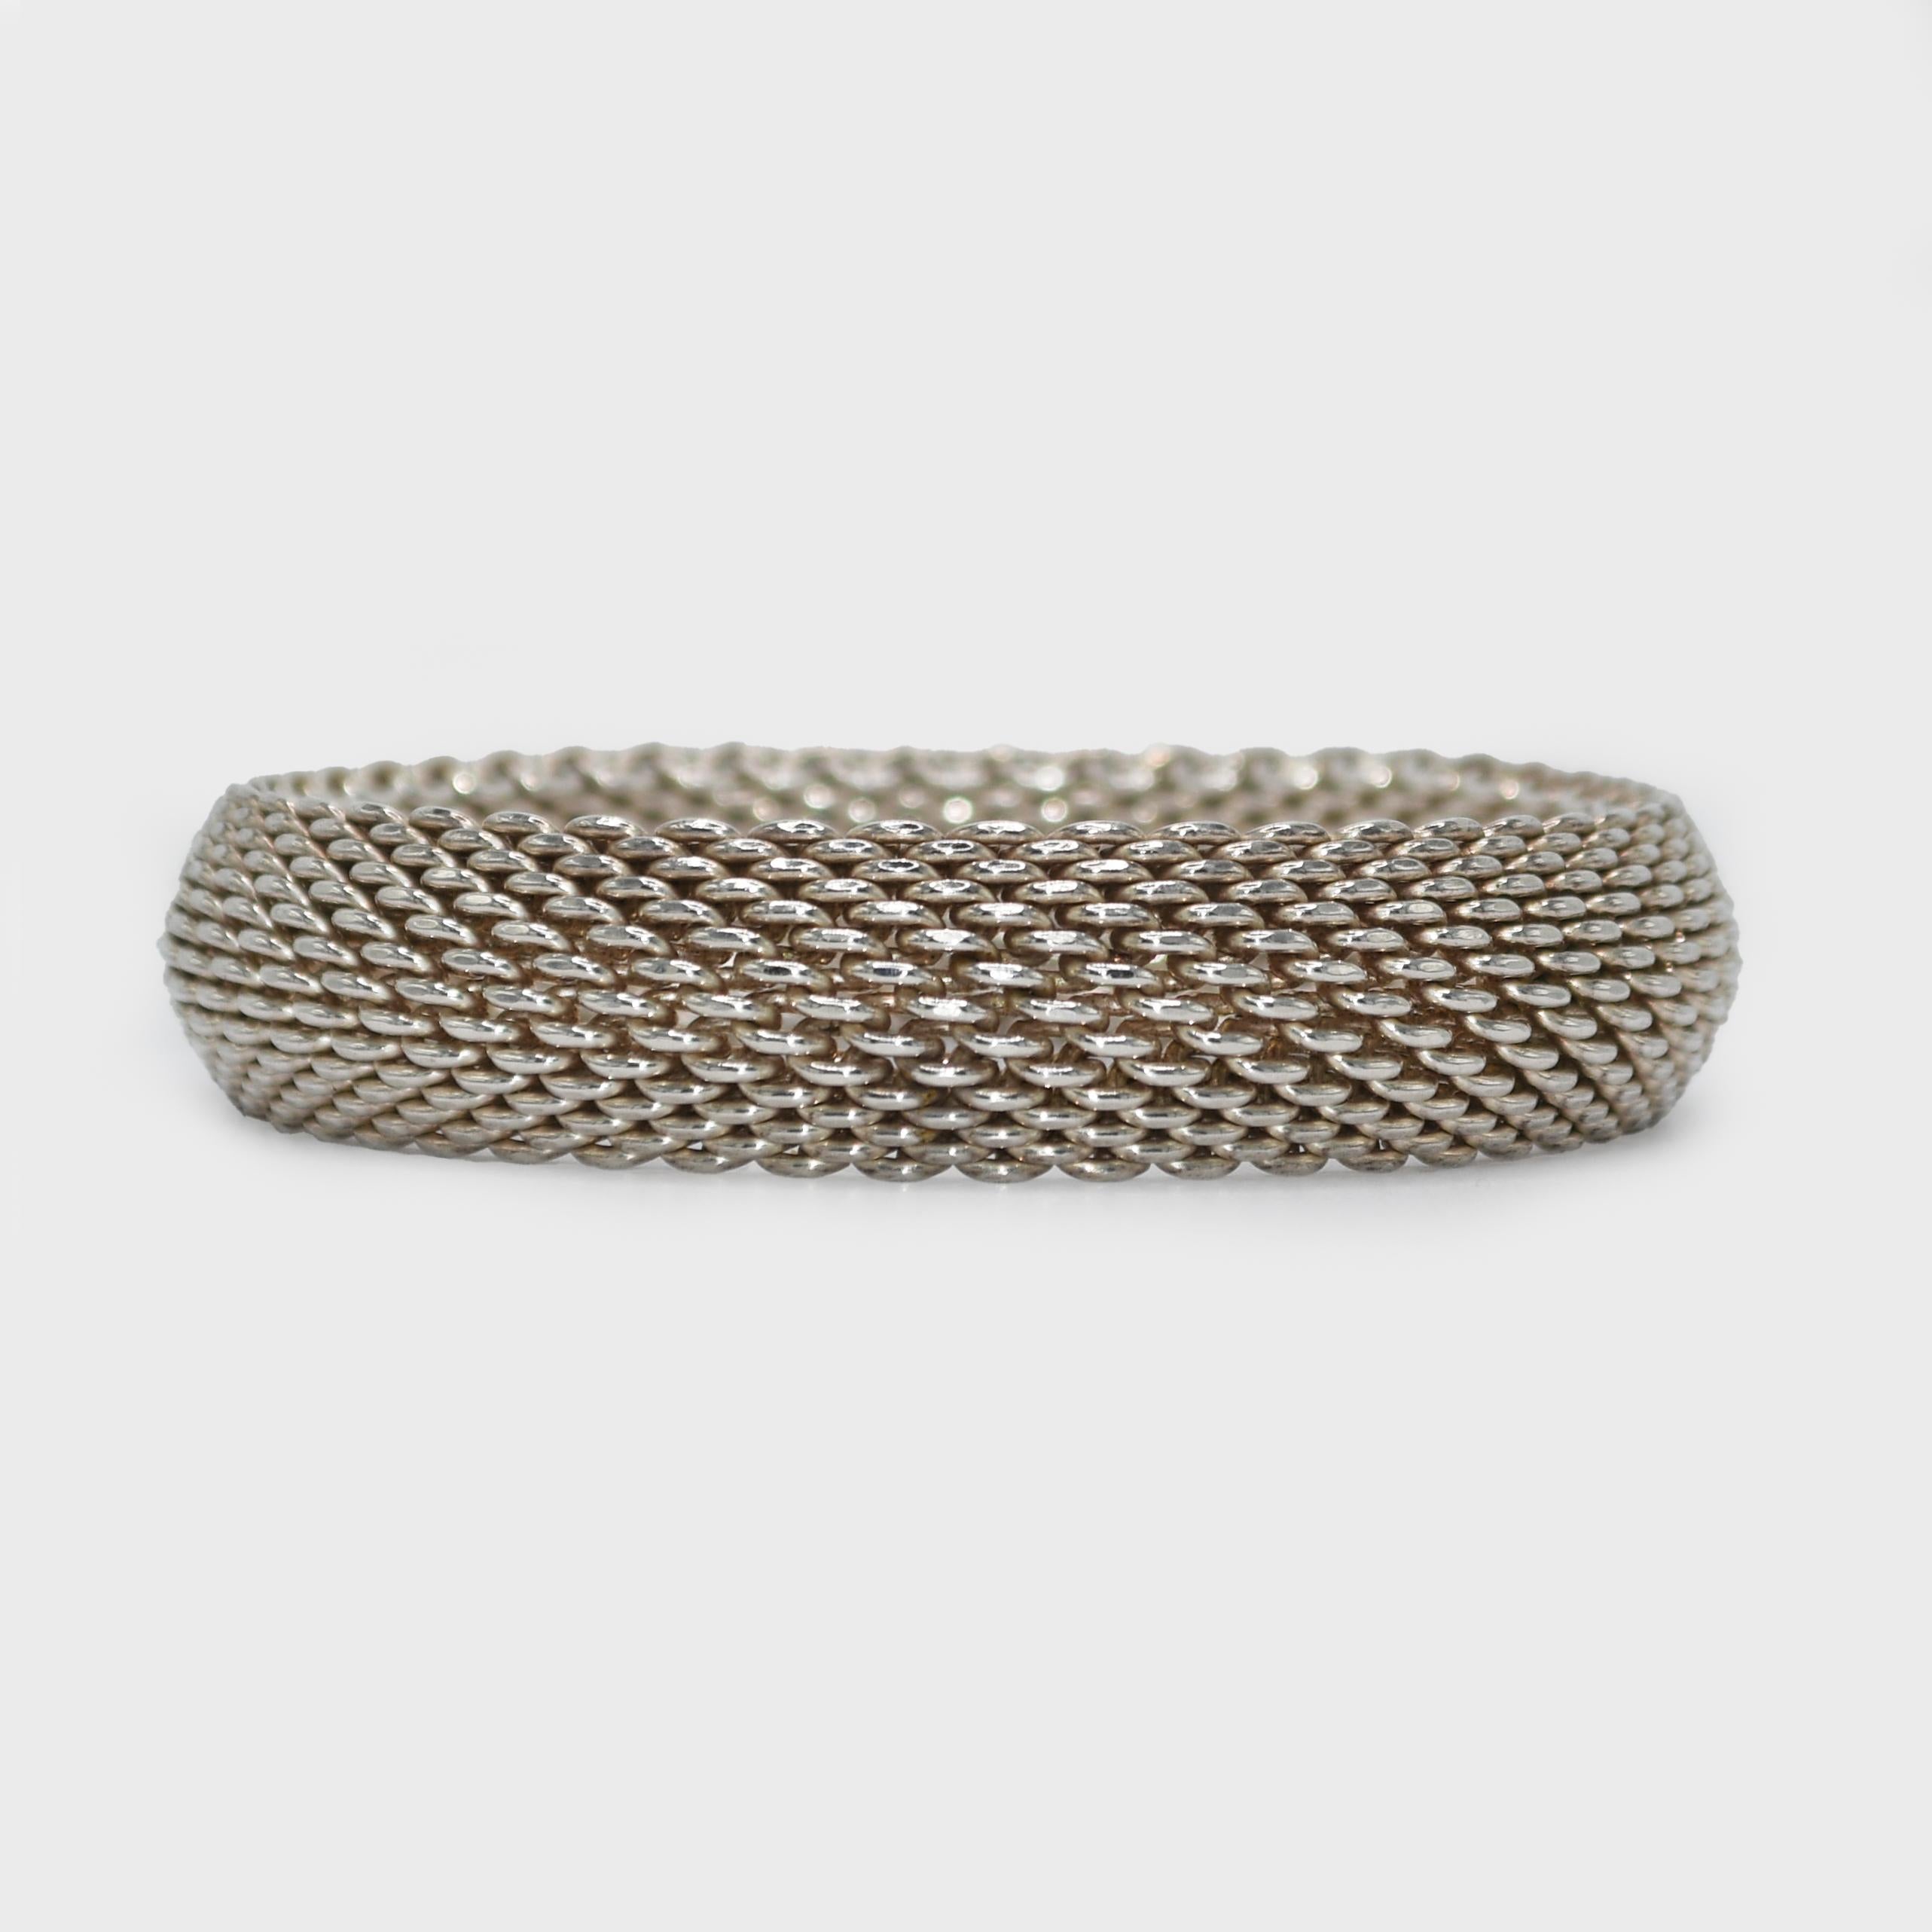 Tiffany & Co. Sterling Somerset Mesh Bracelet 59g
Tiffany & Co sterling silver Somerset mesh bracelet.
Stamped Tiffany & Co 925 and weighs 59 grams.
The bracelet measures 7 inches in circumference on the inside and 5/8 inches wide.
Excellent